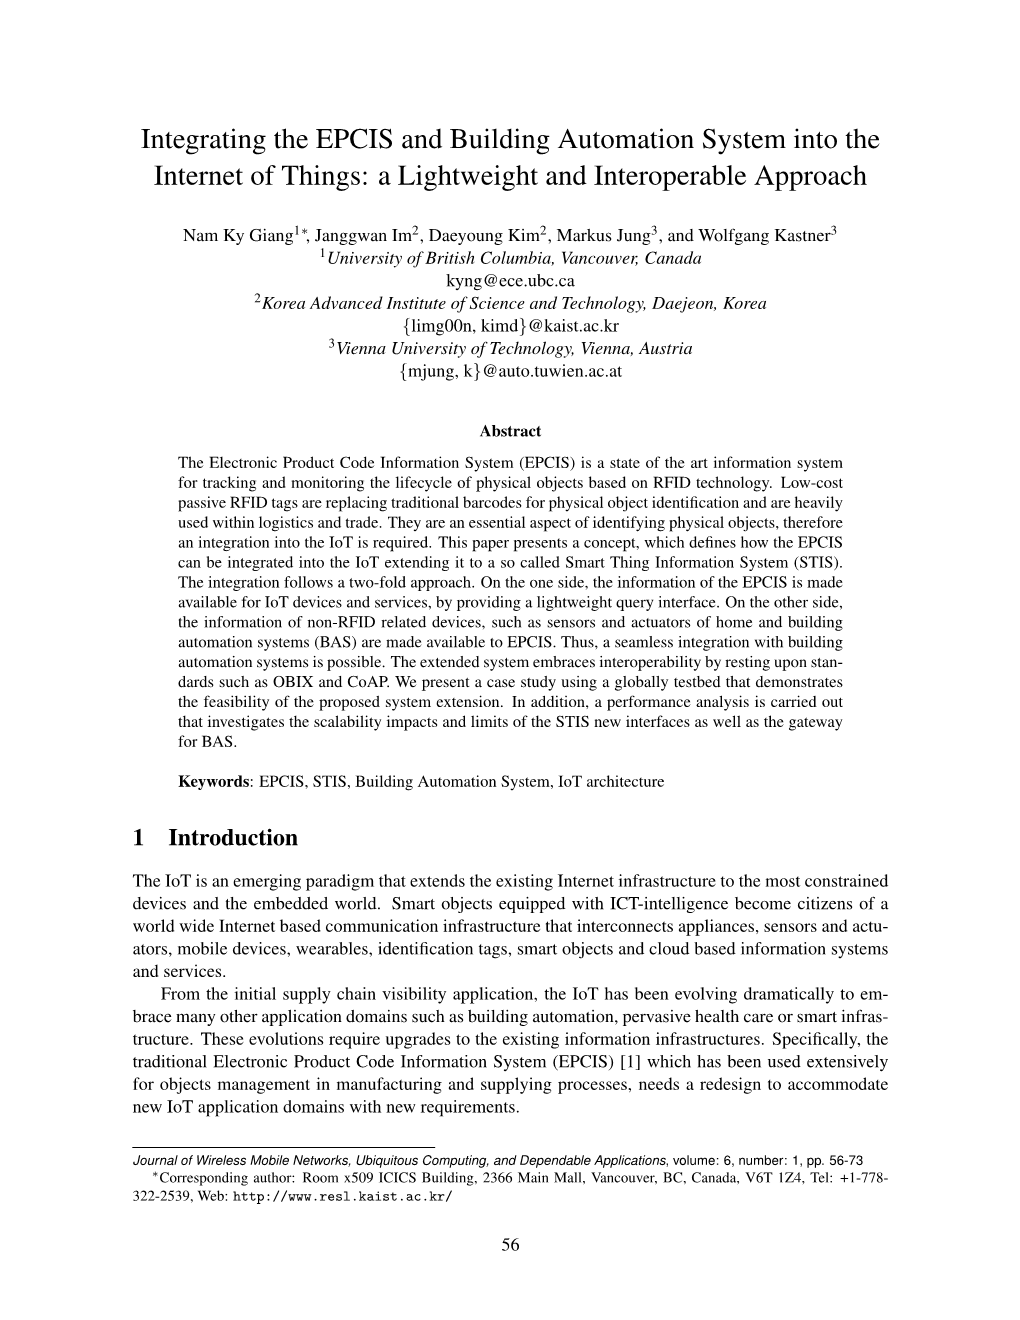 Integrating the EPCIS and Building Automation System Into the Internet of Things: a Lightweight and Interoperable Approach